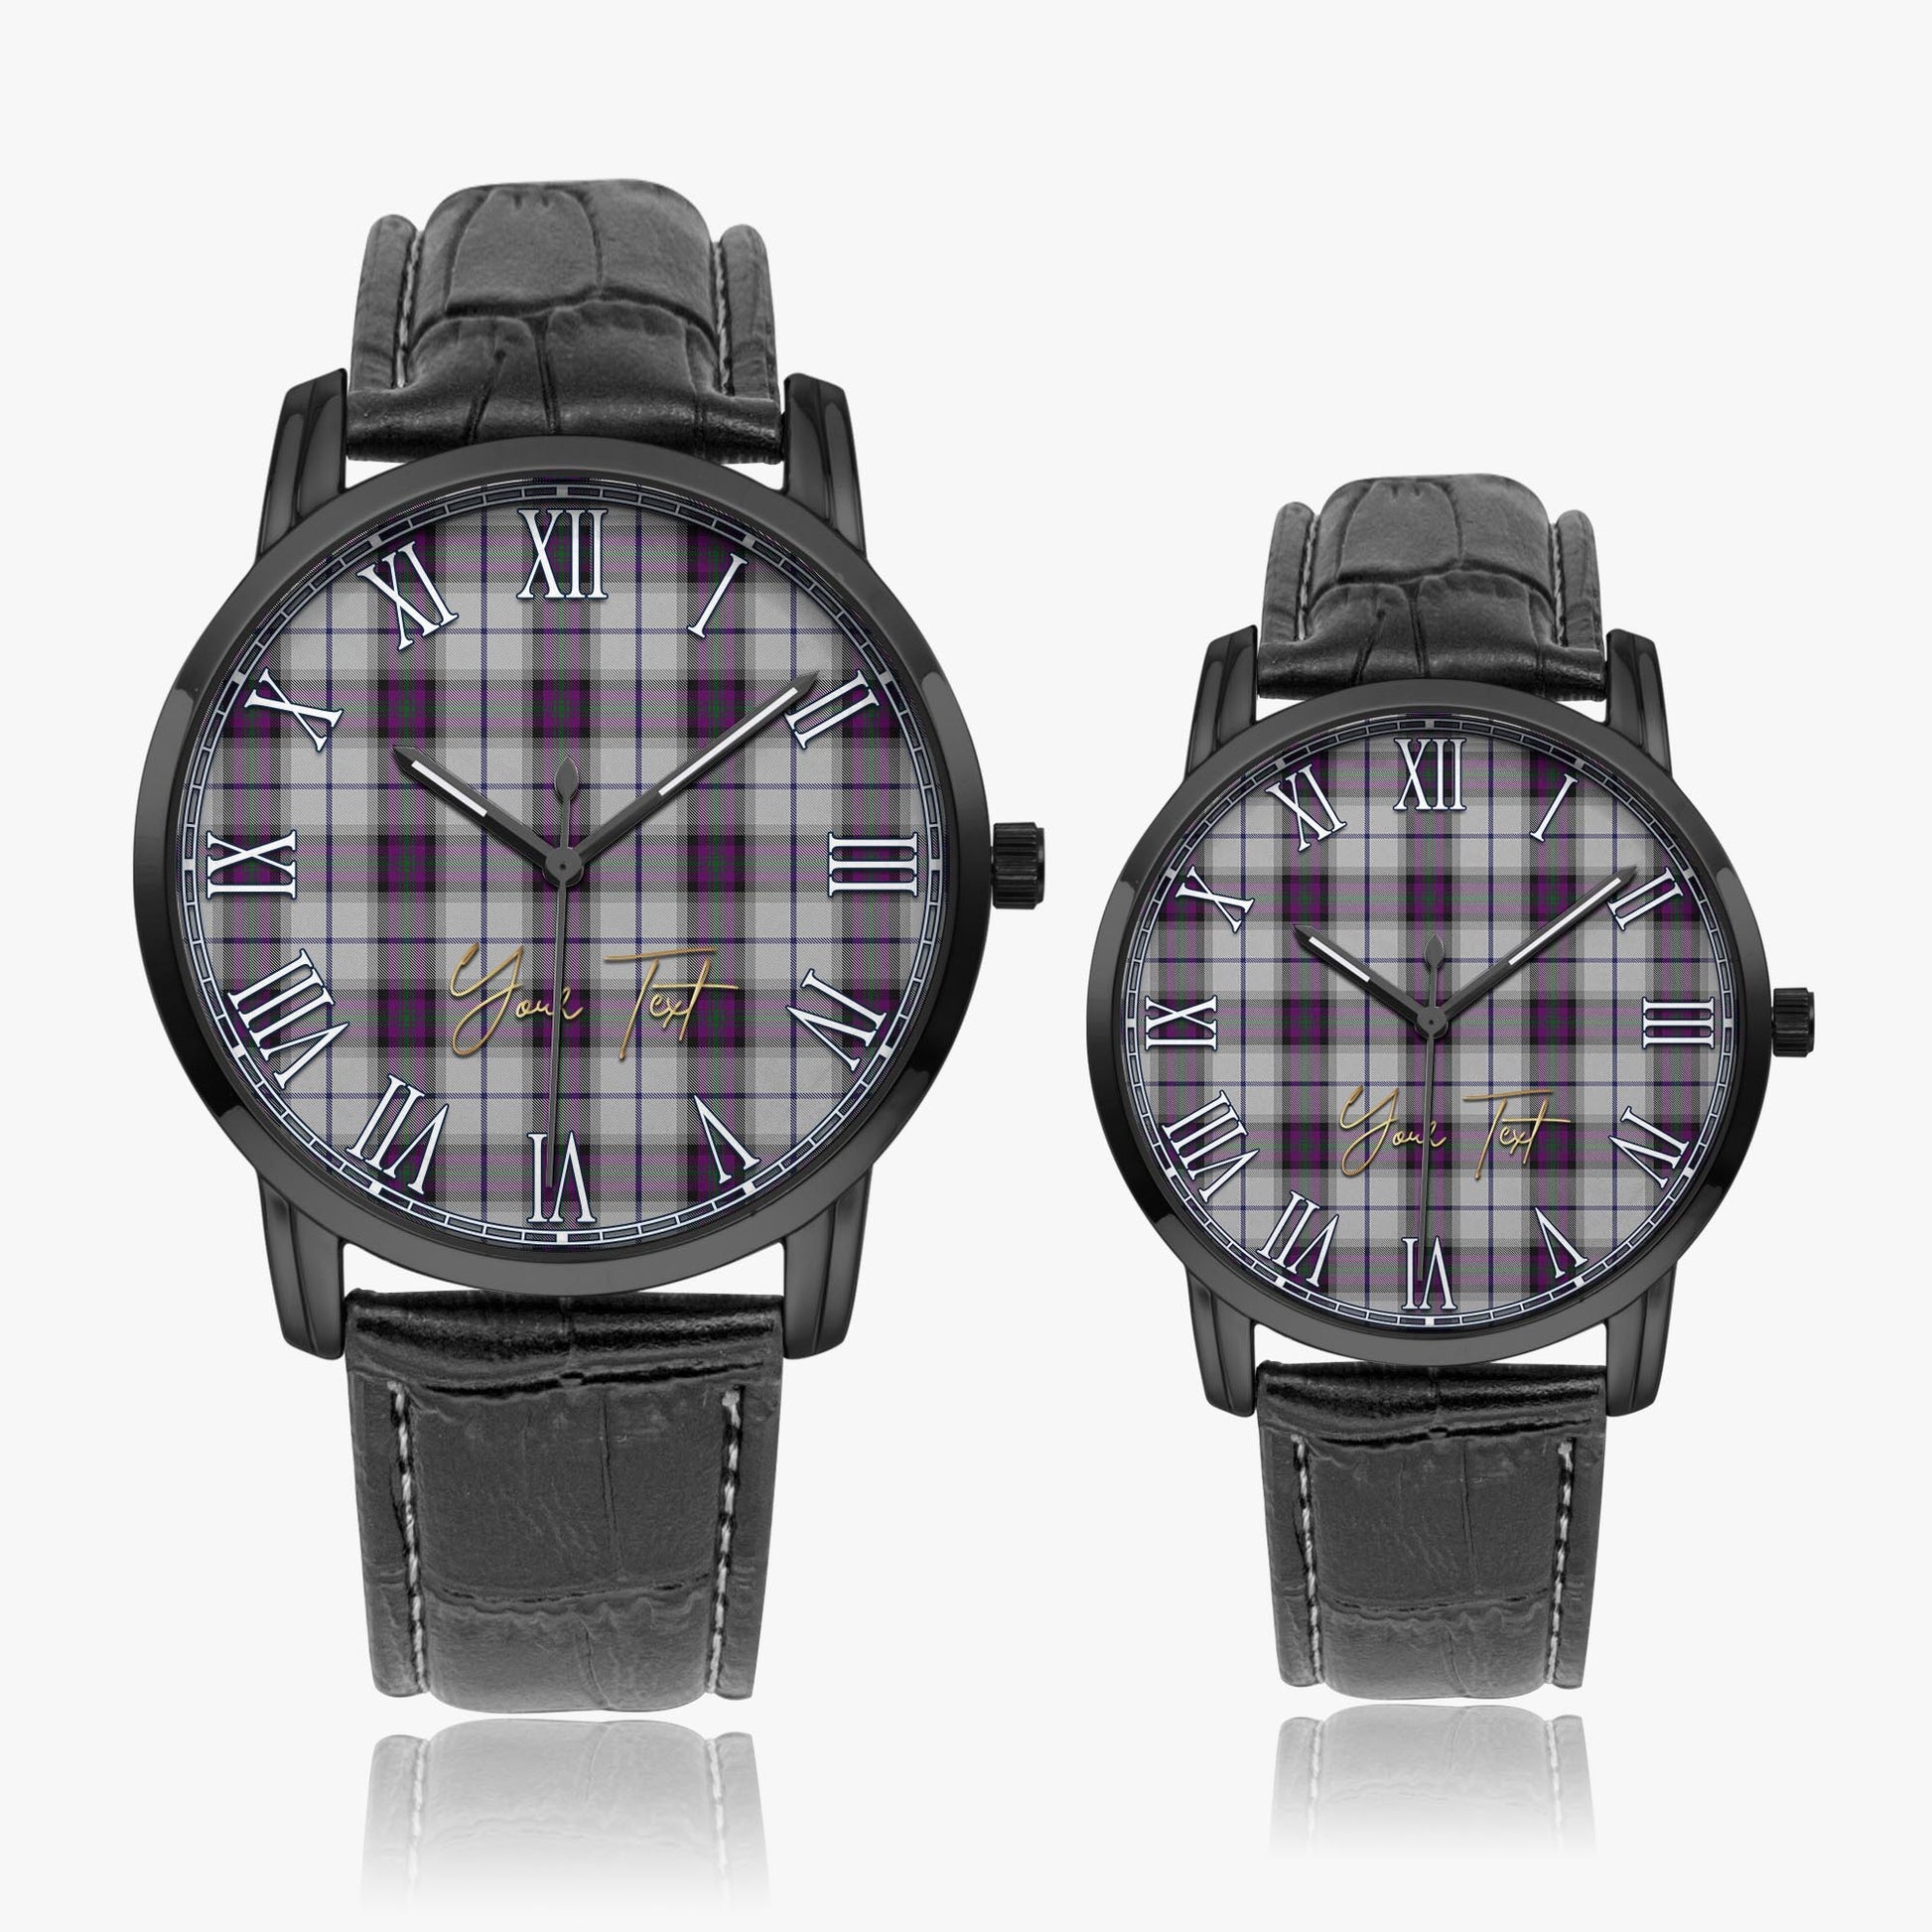 Alexander of Menstry Dress Tartan Personalized Your Text Leather Trap Quartz Watch Wide Type Black Case With Black Leather Strap - Tartanvibesclothing